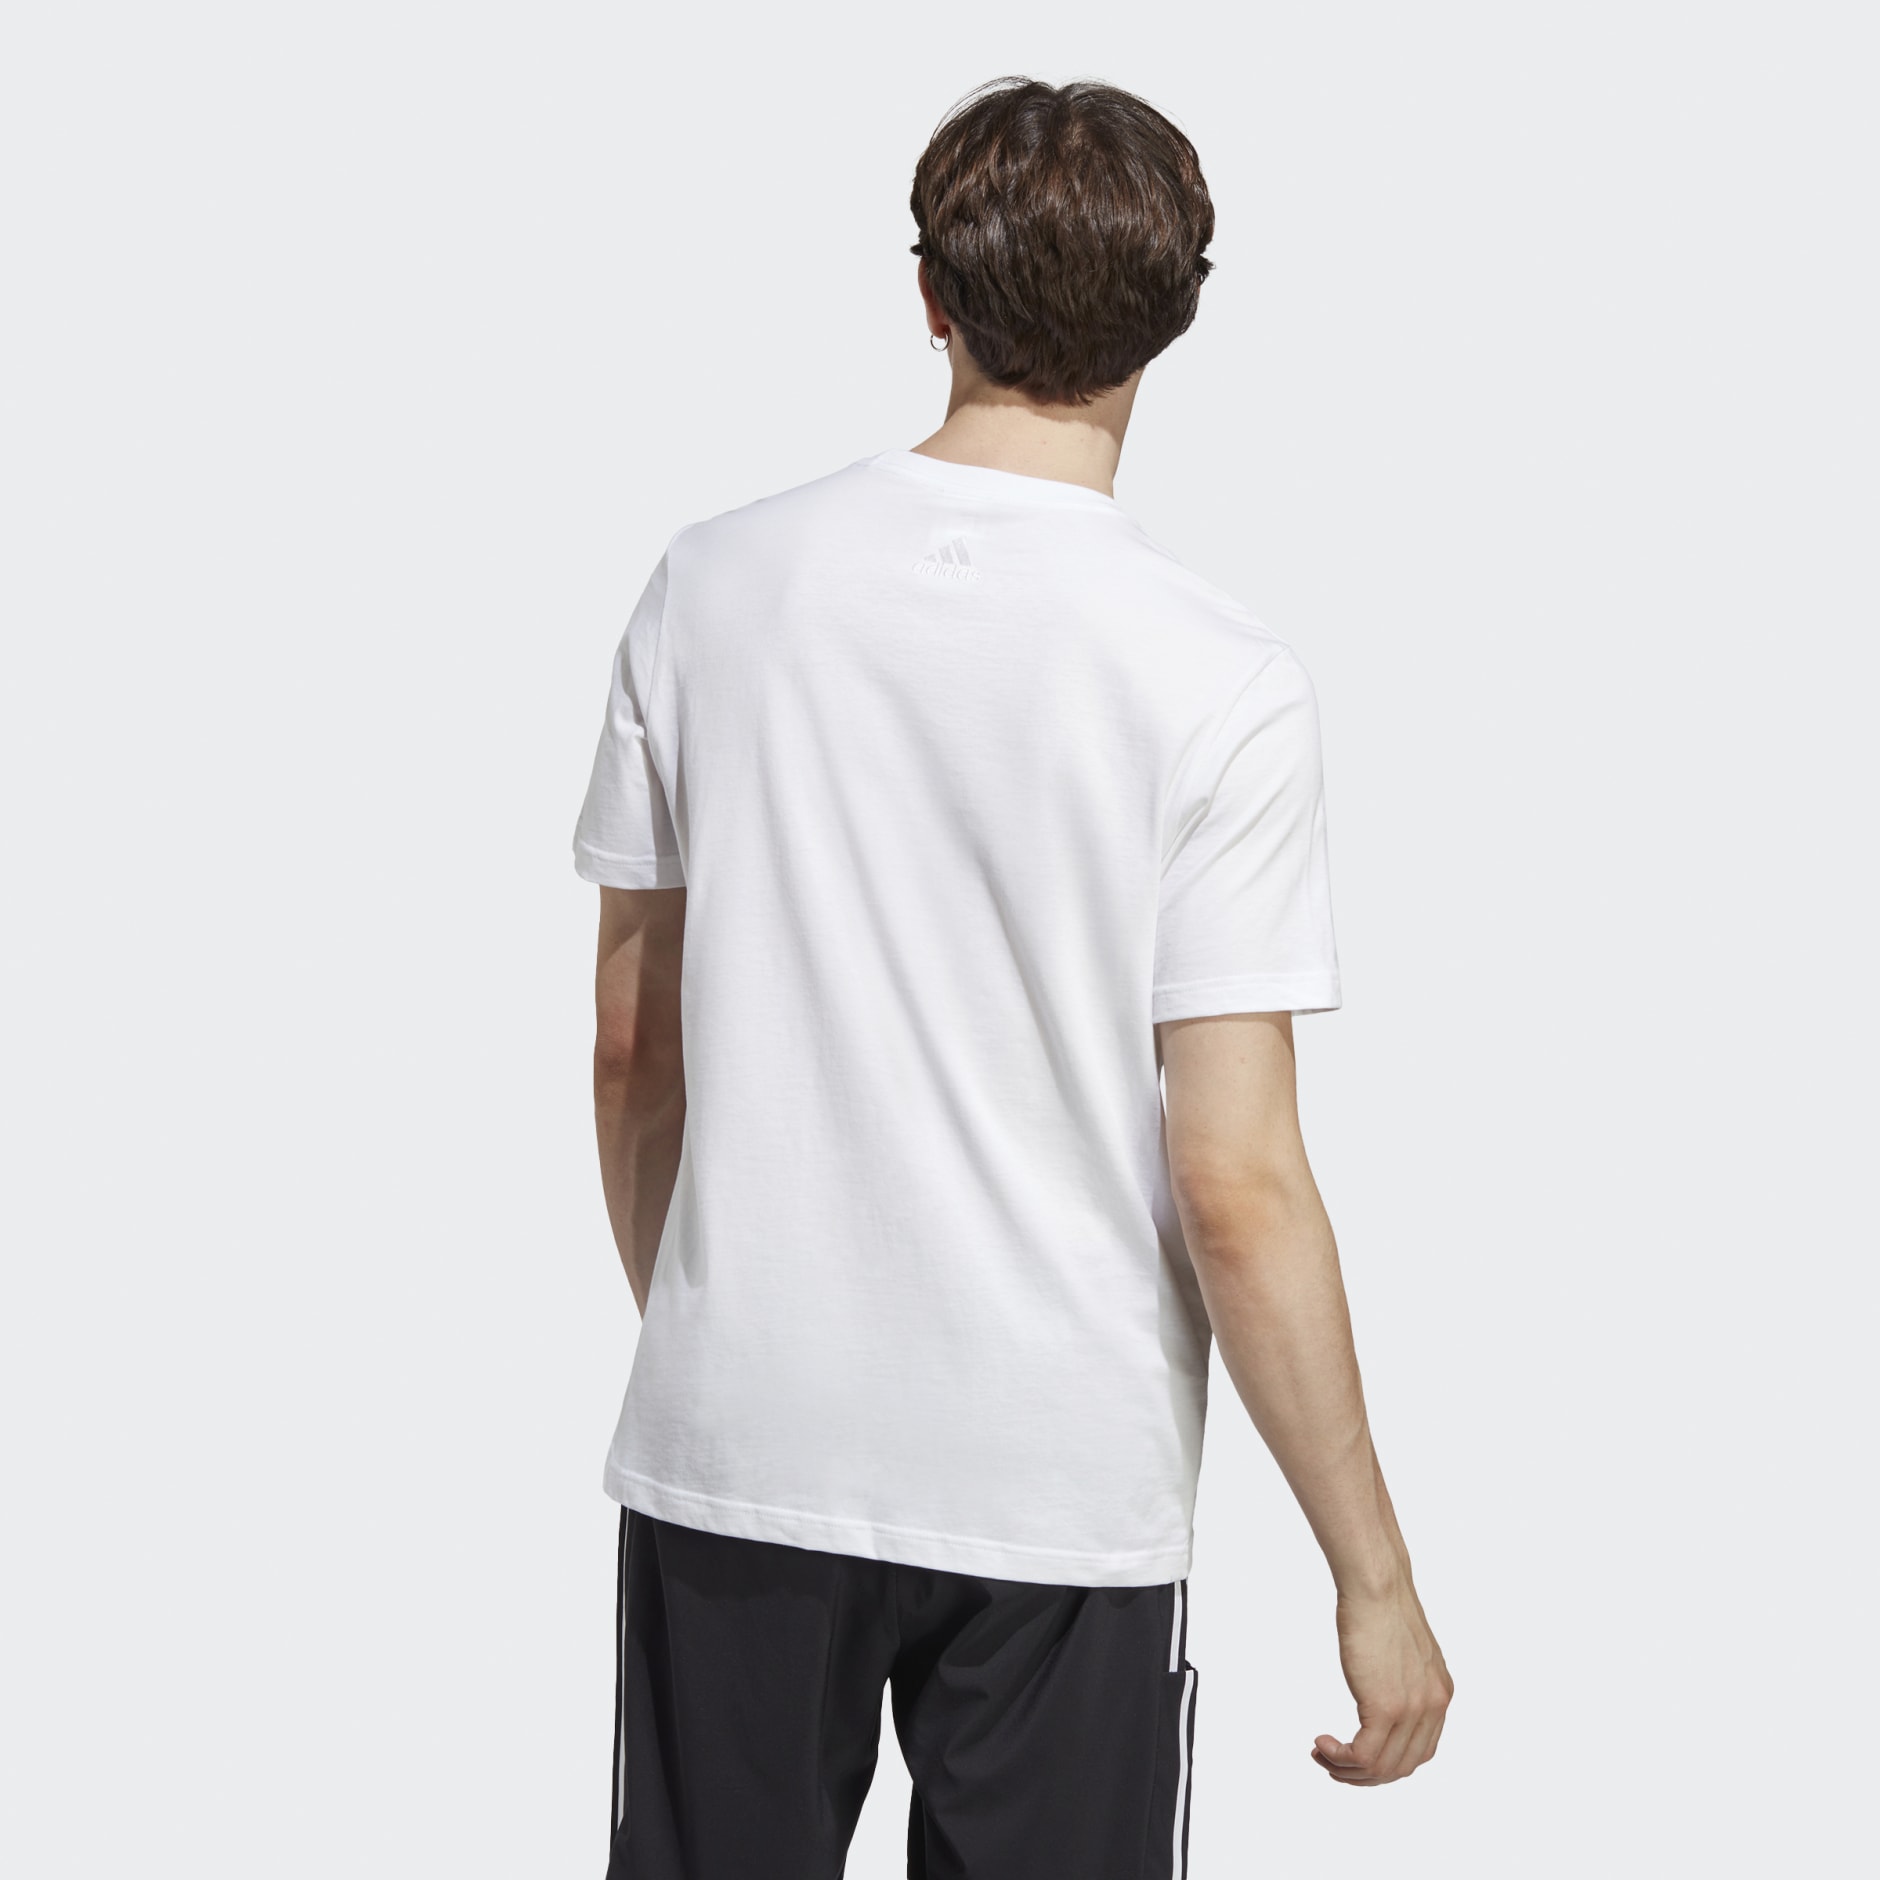 adidas Essentials Single adidas Tee GH Jersey White | Embroidered - Linear Logo